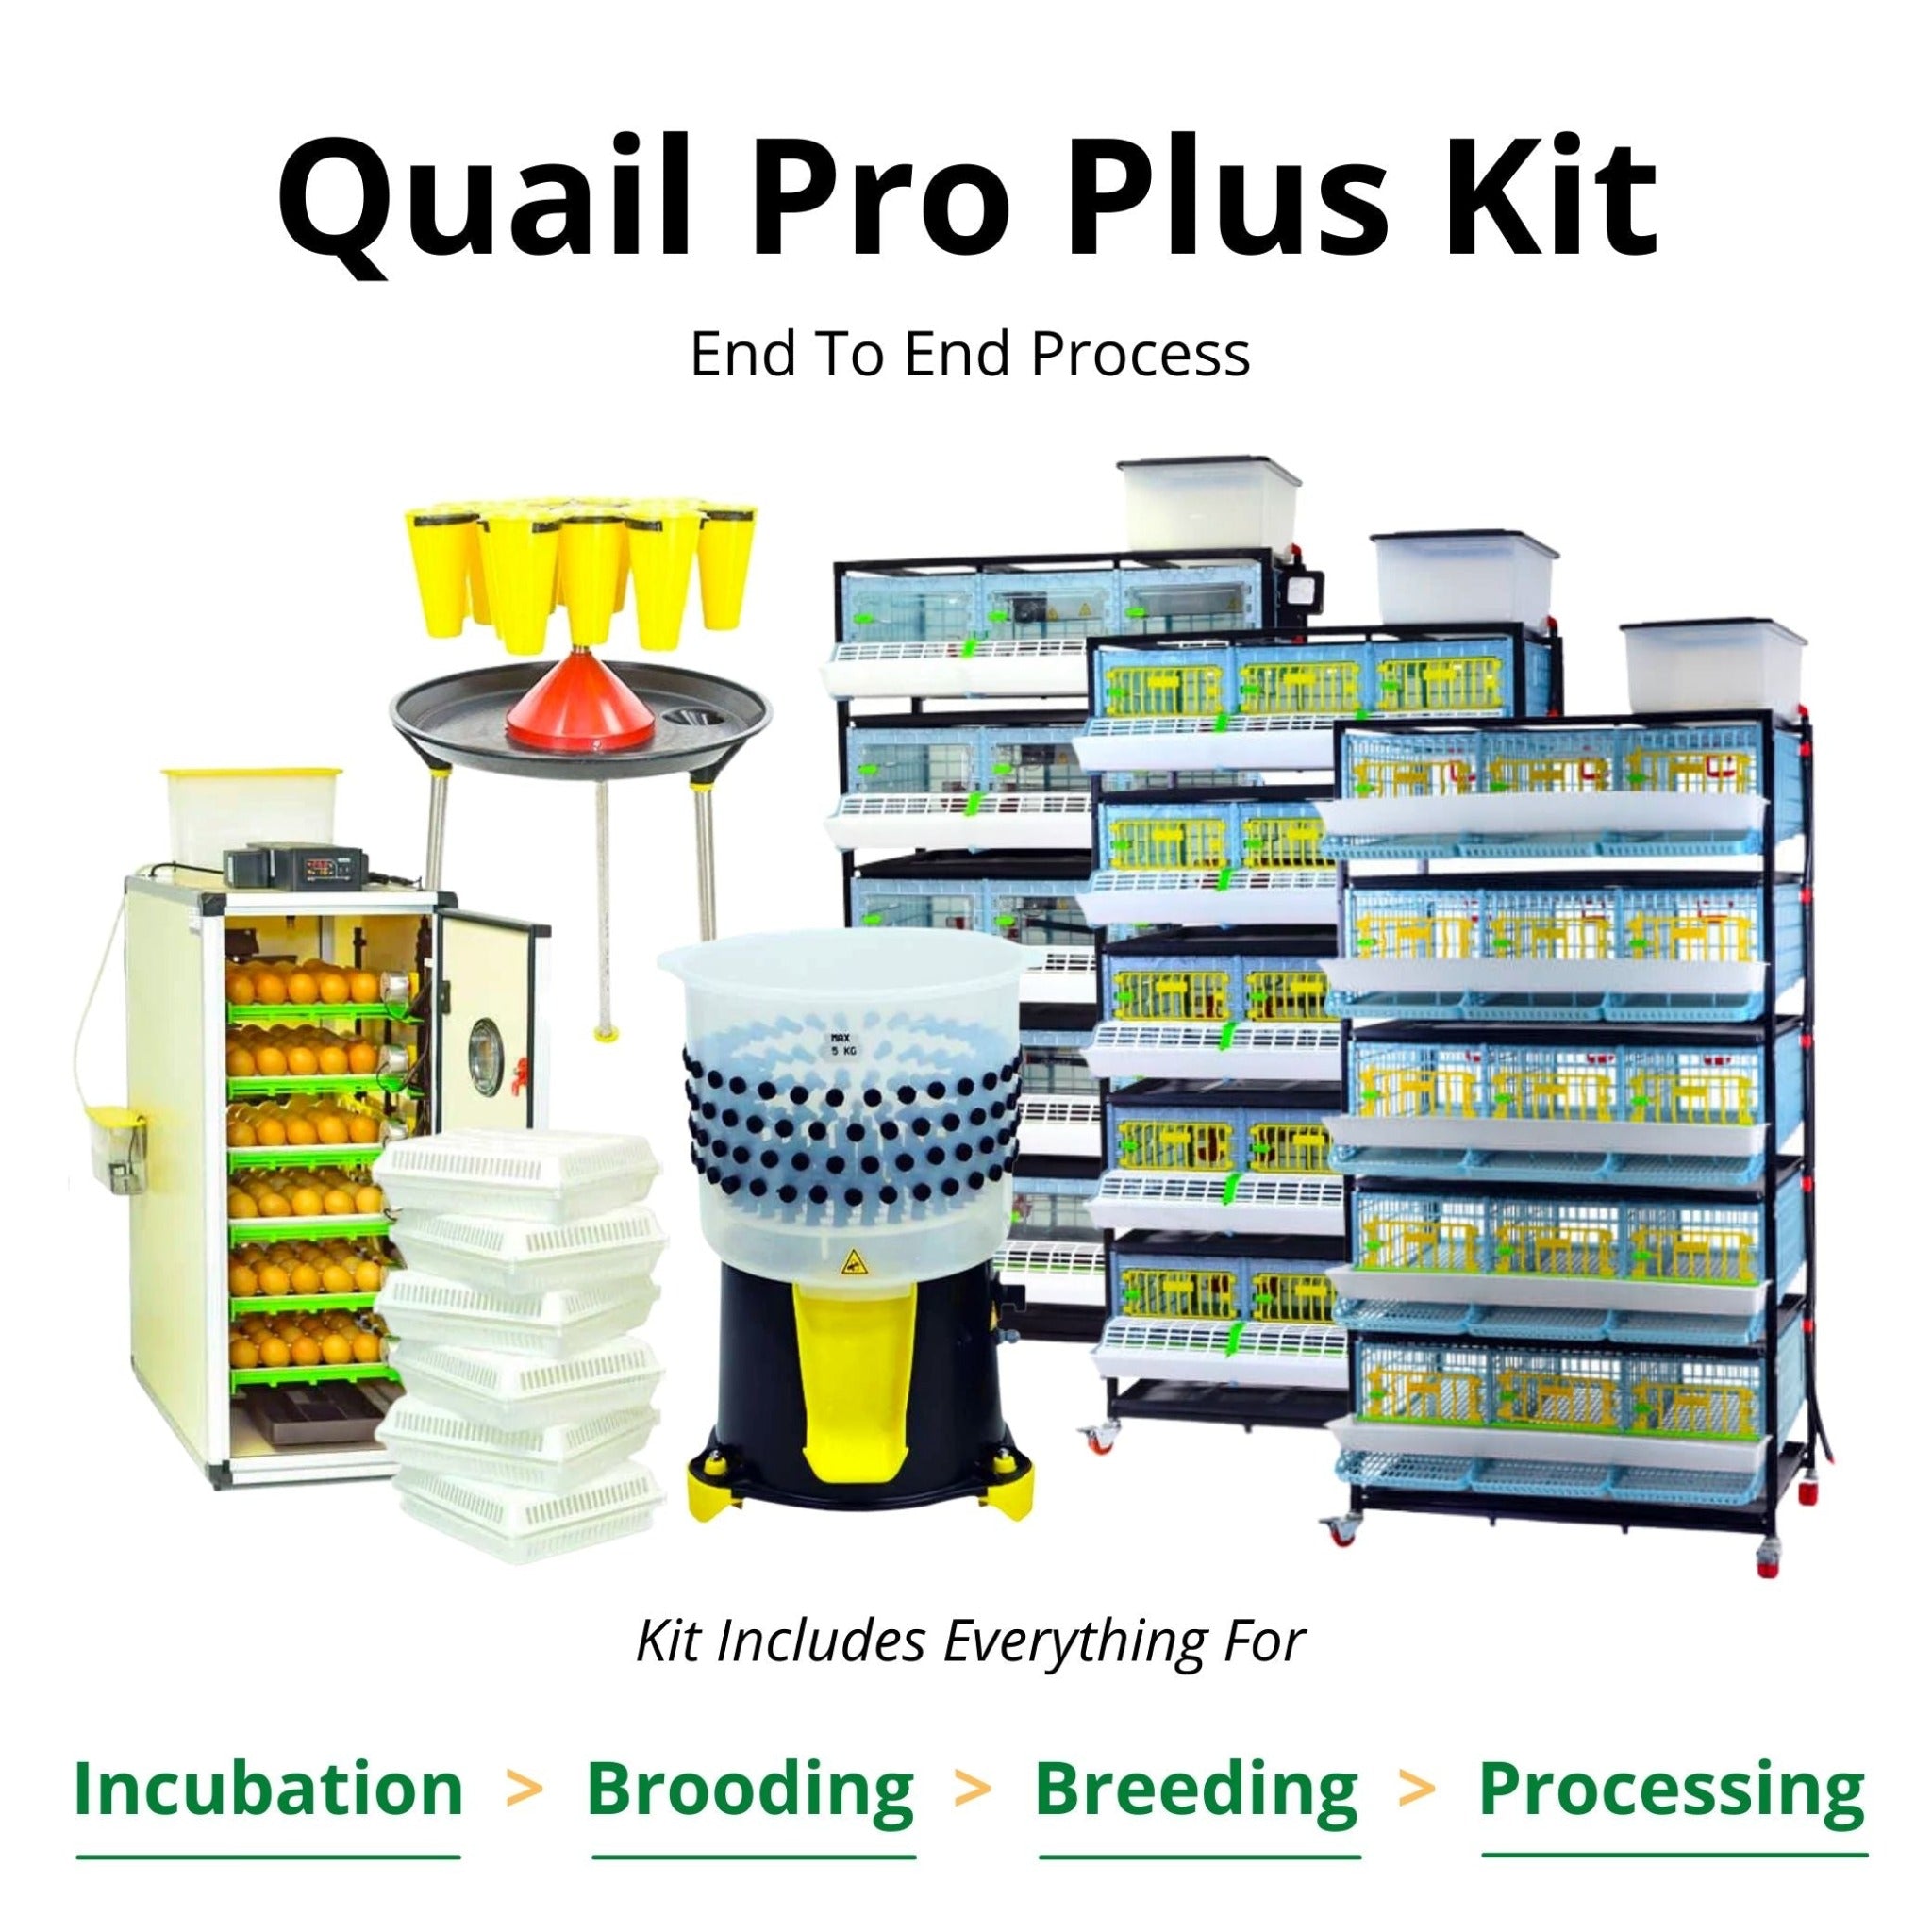 Hatching Time Cimuka Quail Pro Plus Kit shown. Infographic showing all items included in Kit. CT180 Egg incubator, Hatching Baskets, Setter Trays, 5 Layer 9.5 Inch Brooder, Grow Out Pens and Quail Cages with rolling egg trays. Processing Station with stand and Feather plucker shown as well. Image states everything is included in the kit for Incubation, Brooding, Breeding and Processing.